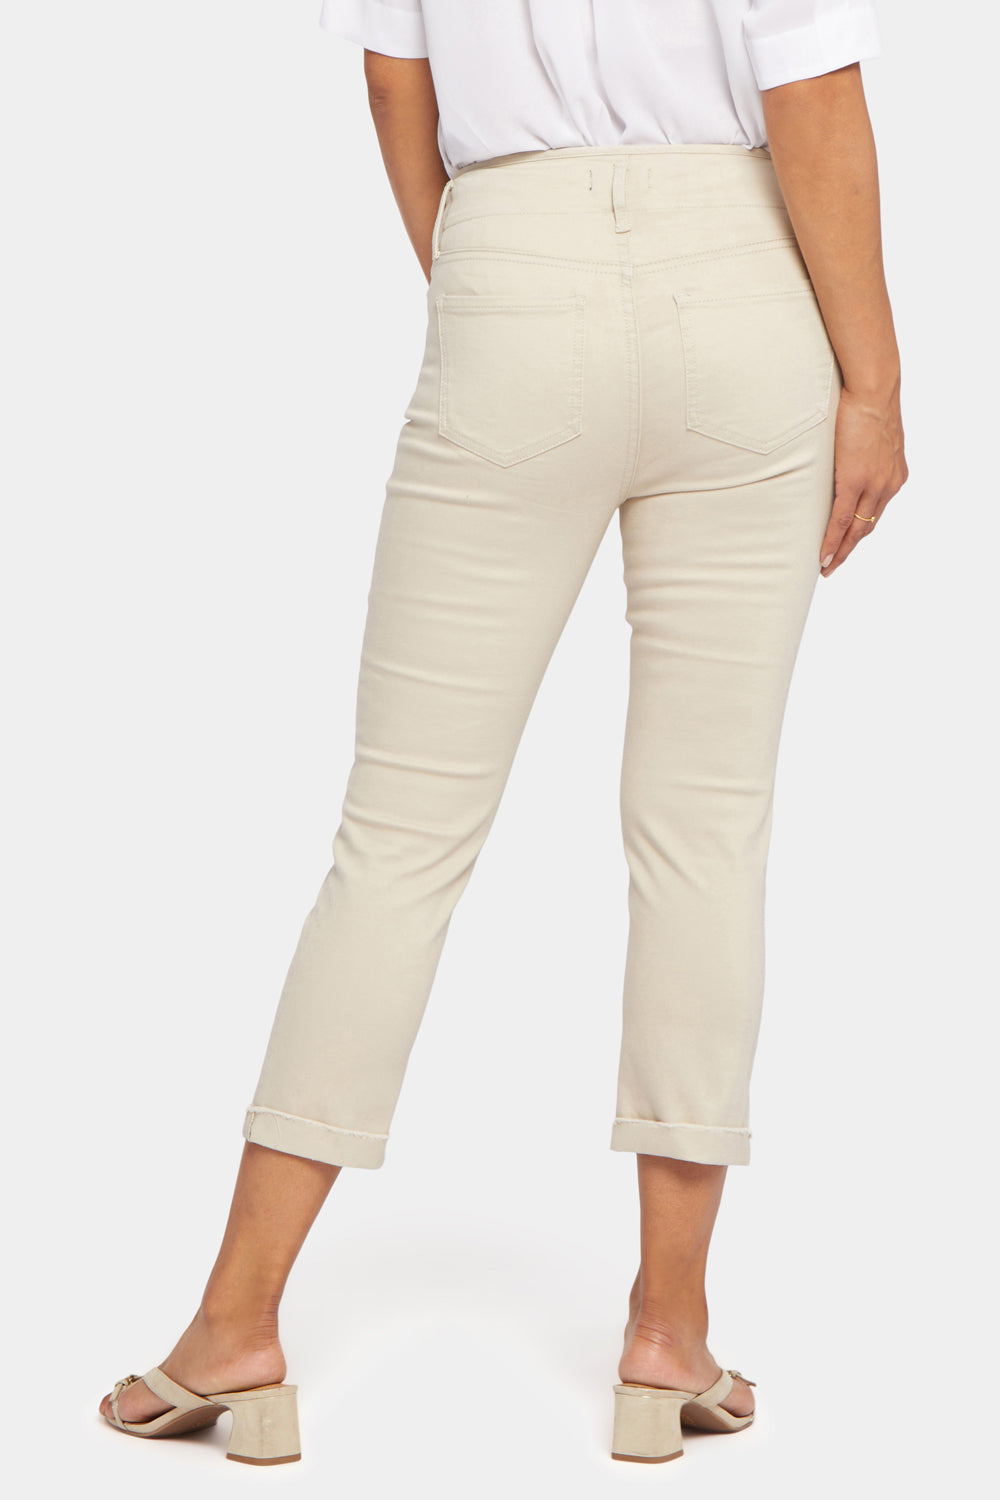 Chloe Capri Jeans With Cuffs - Feather Red | NYDJ